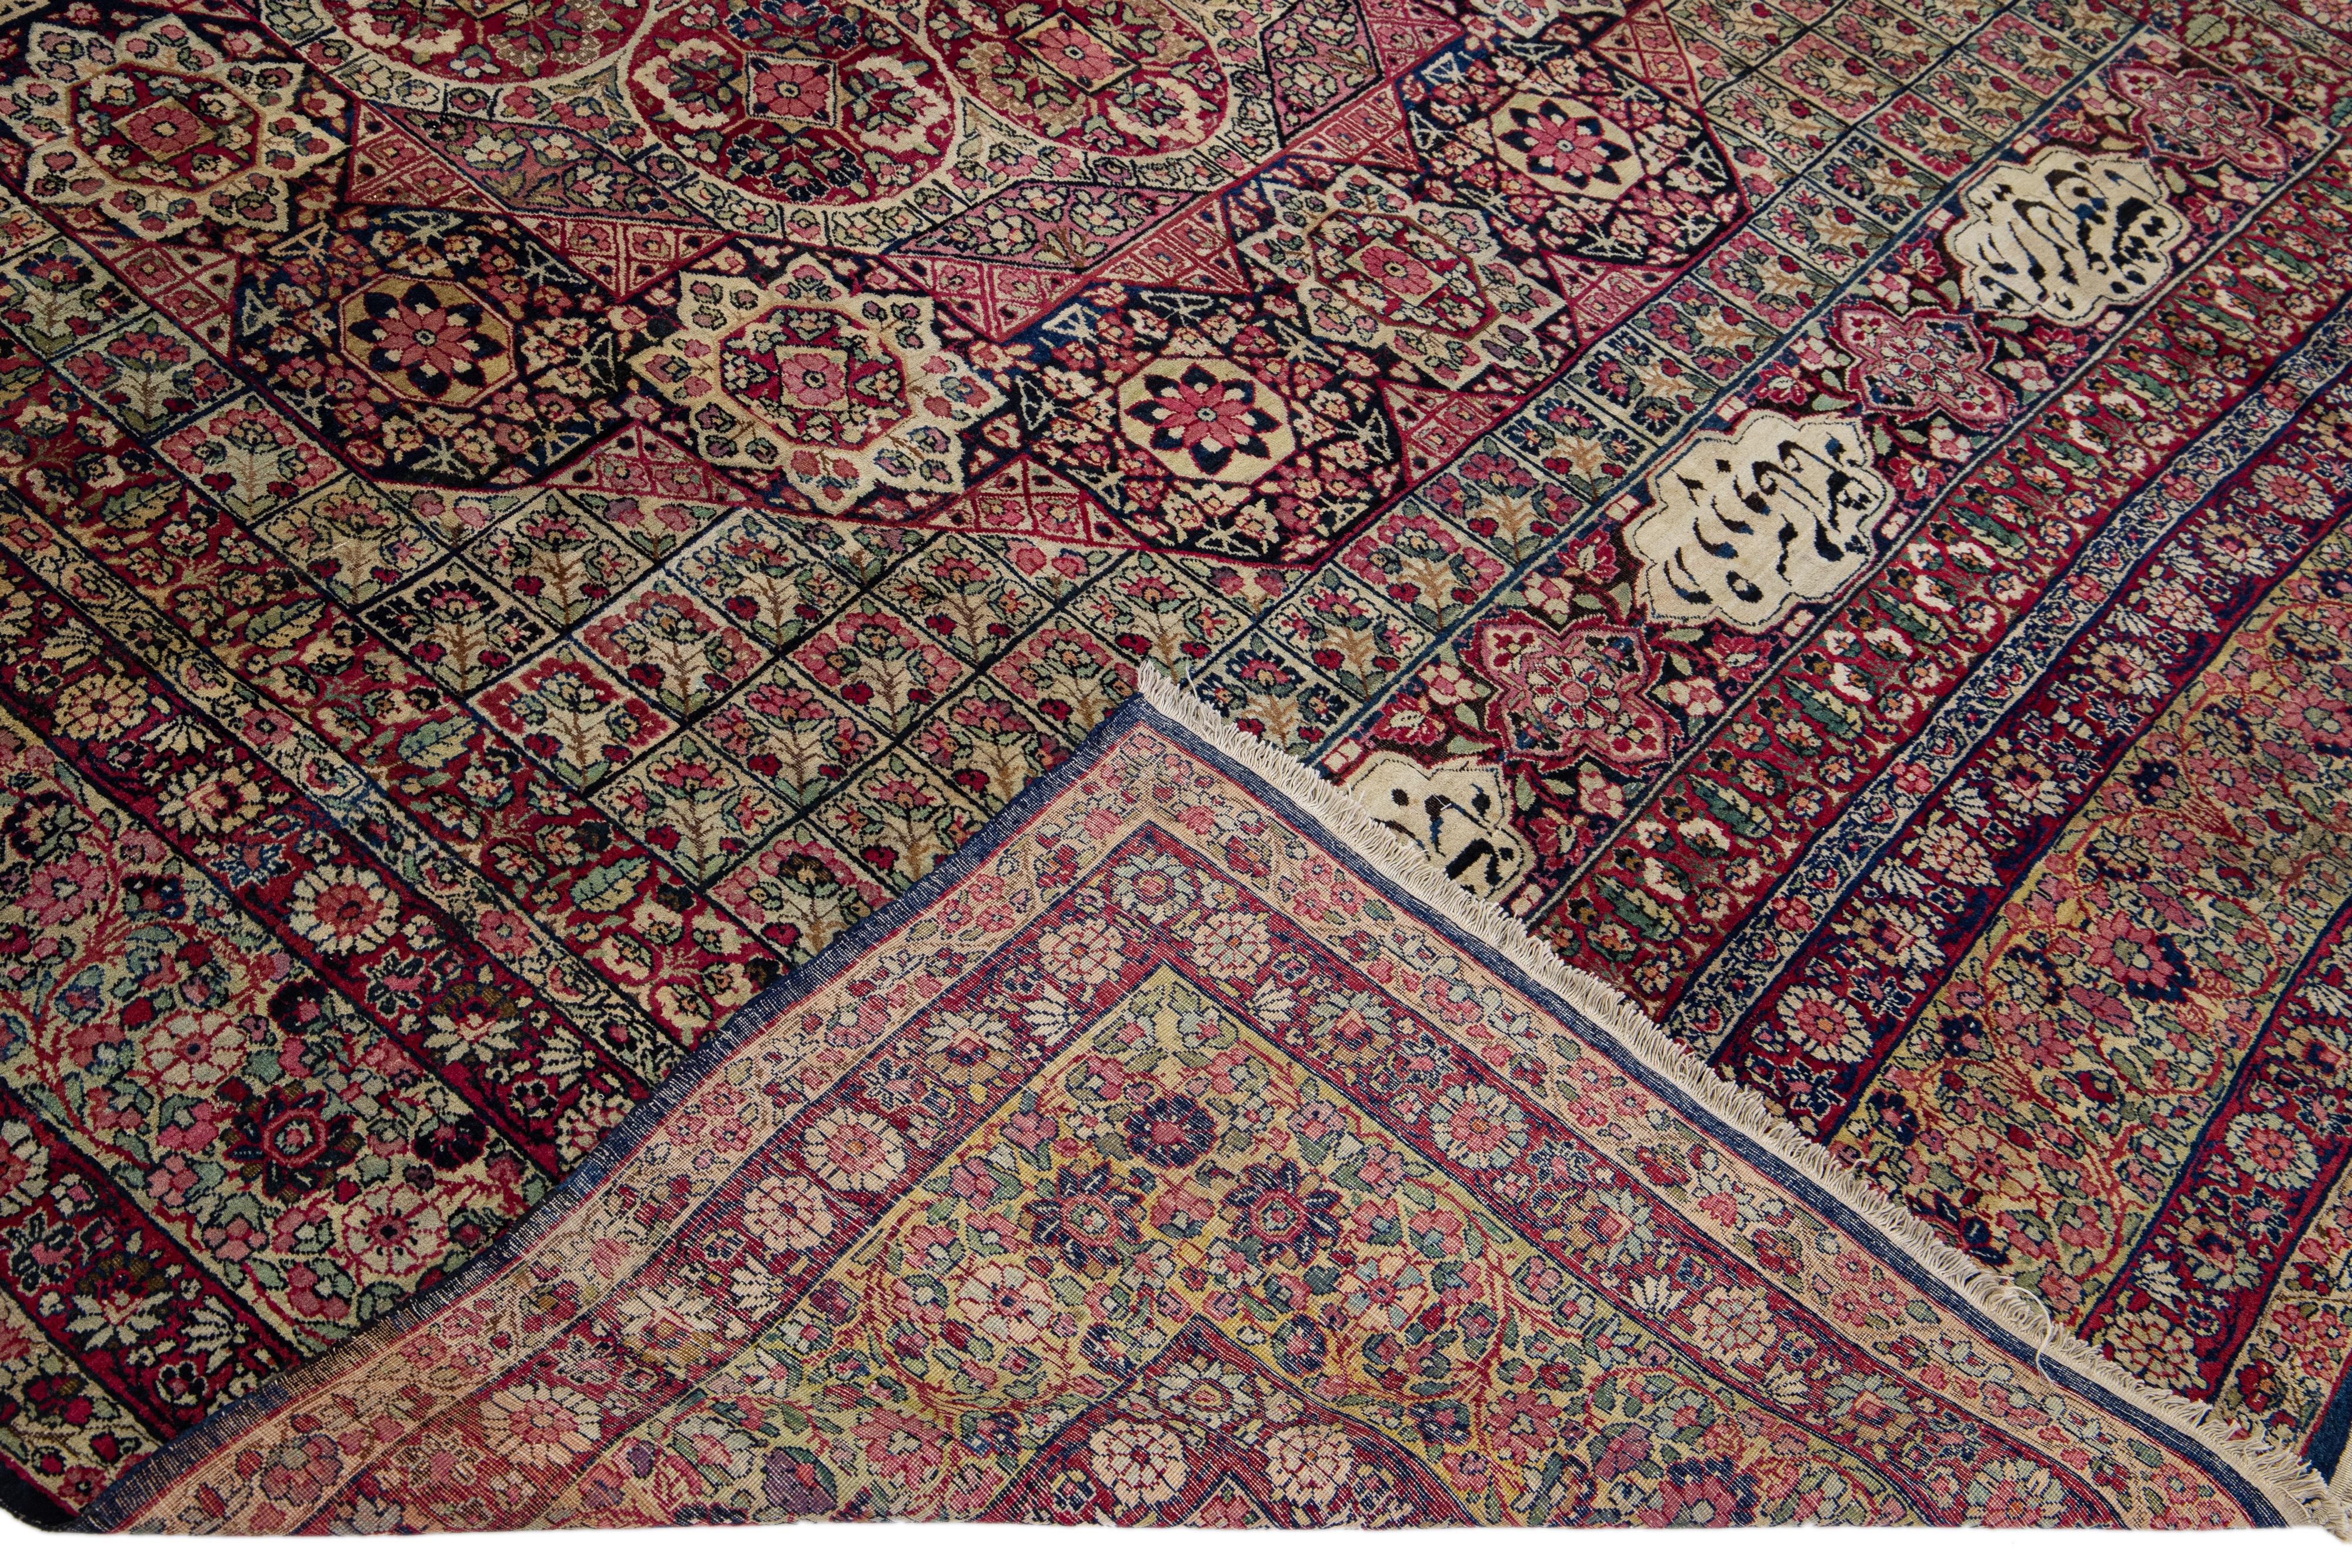 Beautiful antique Kerman hand-knotted wool rug with a tan field. This Kerman rug has pink, red, and blue accents in a gorgeous all-over floral pattern design.

This rug measures: 8'10